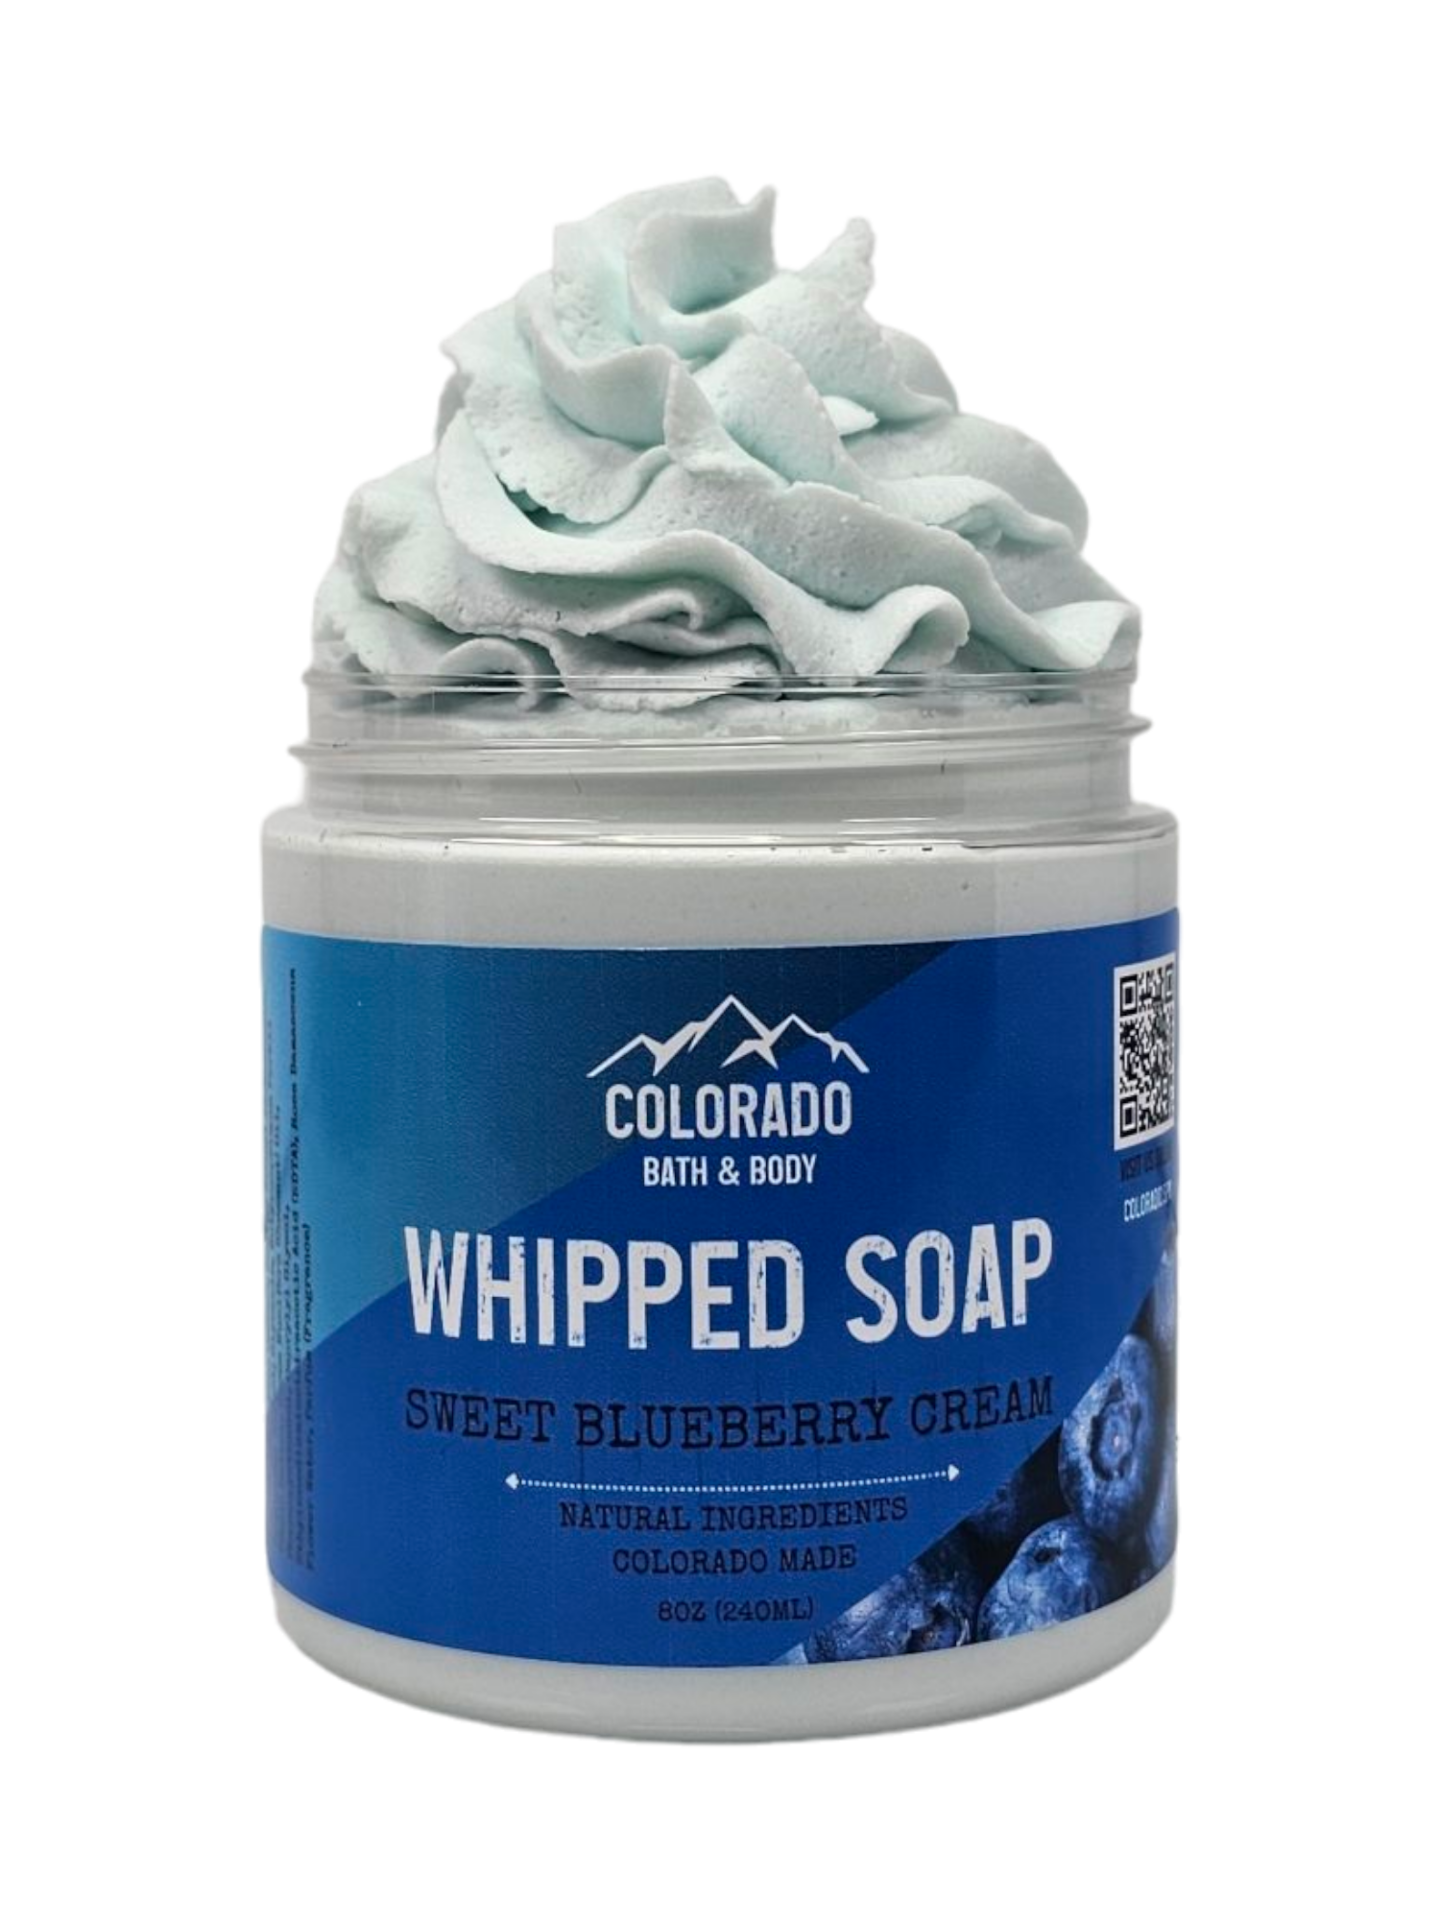 Sweet Blueberry Cream Whipped Soap